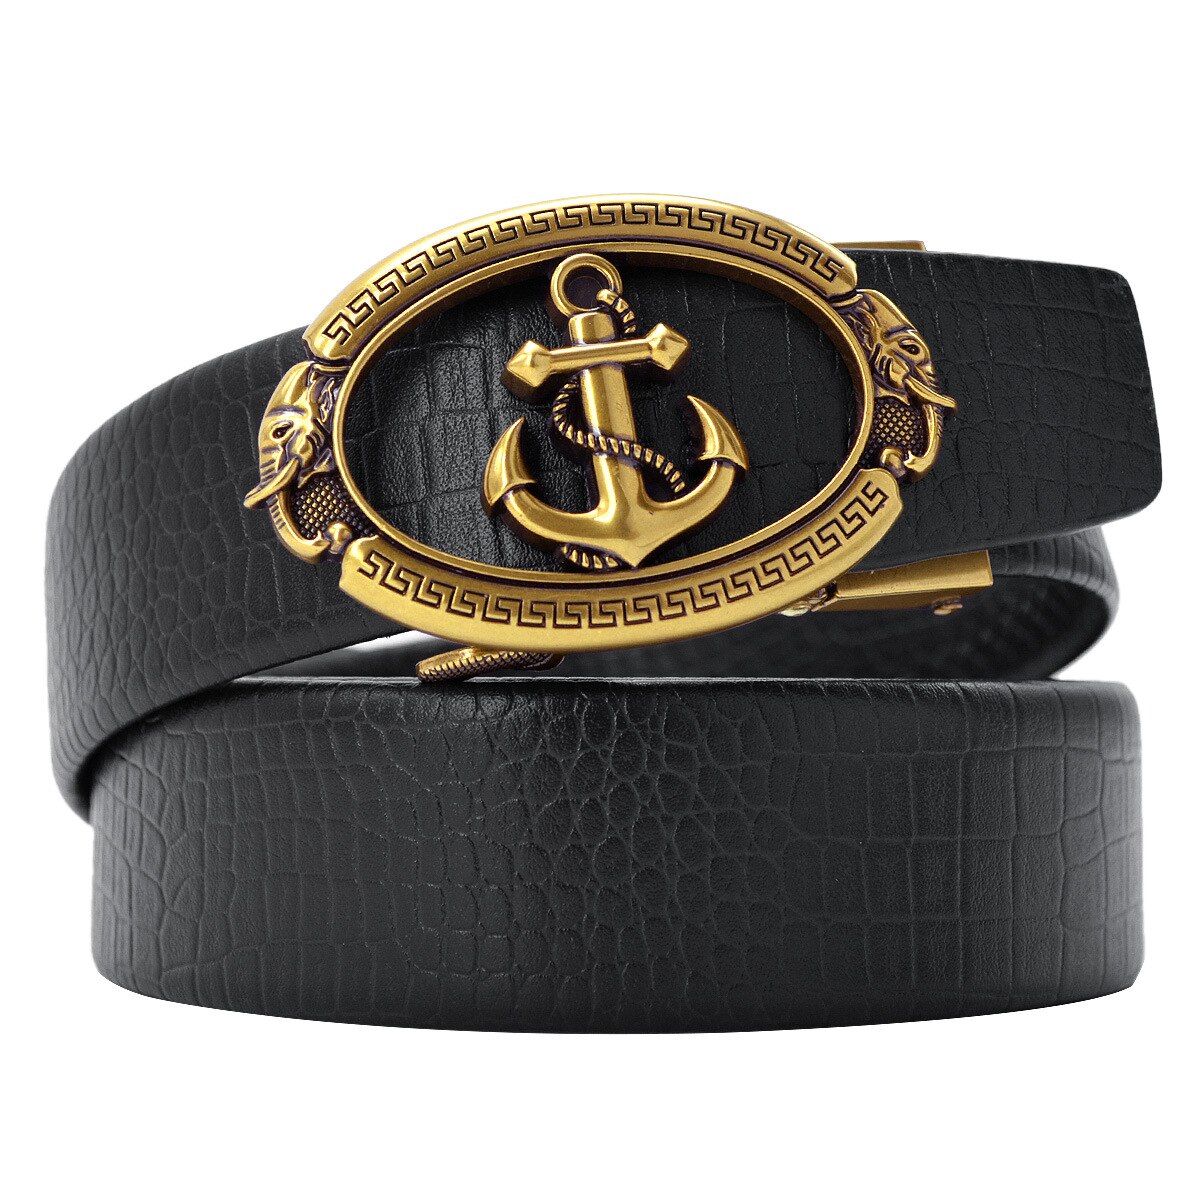 CEXIKA Gold Silver Alloy Anchor Automatic Buckle Belts for Men Lychee  Pattern Black High Quality Black Belt Strap for Men Jeans